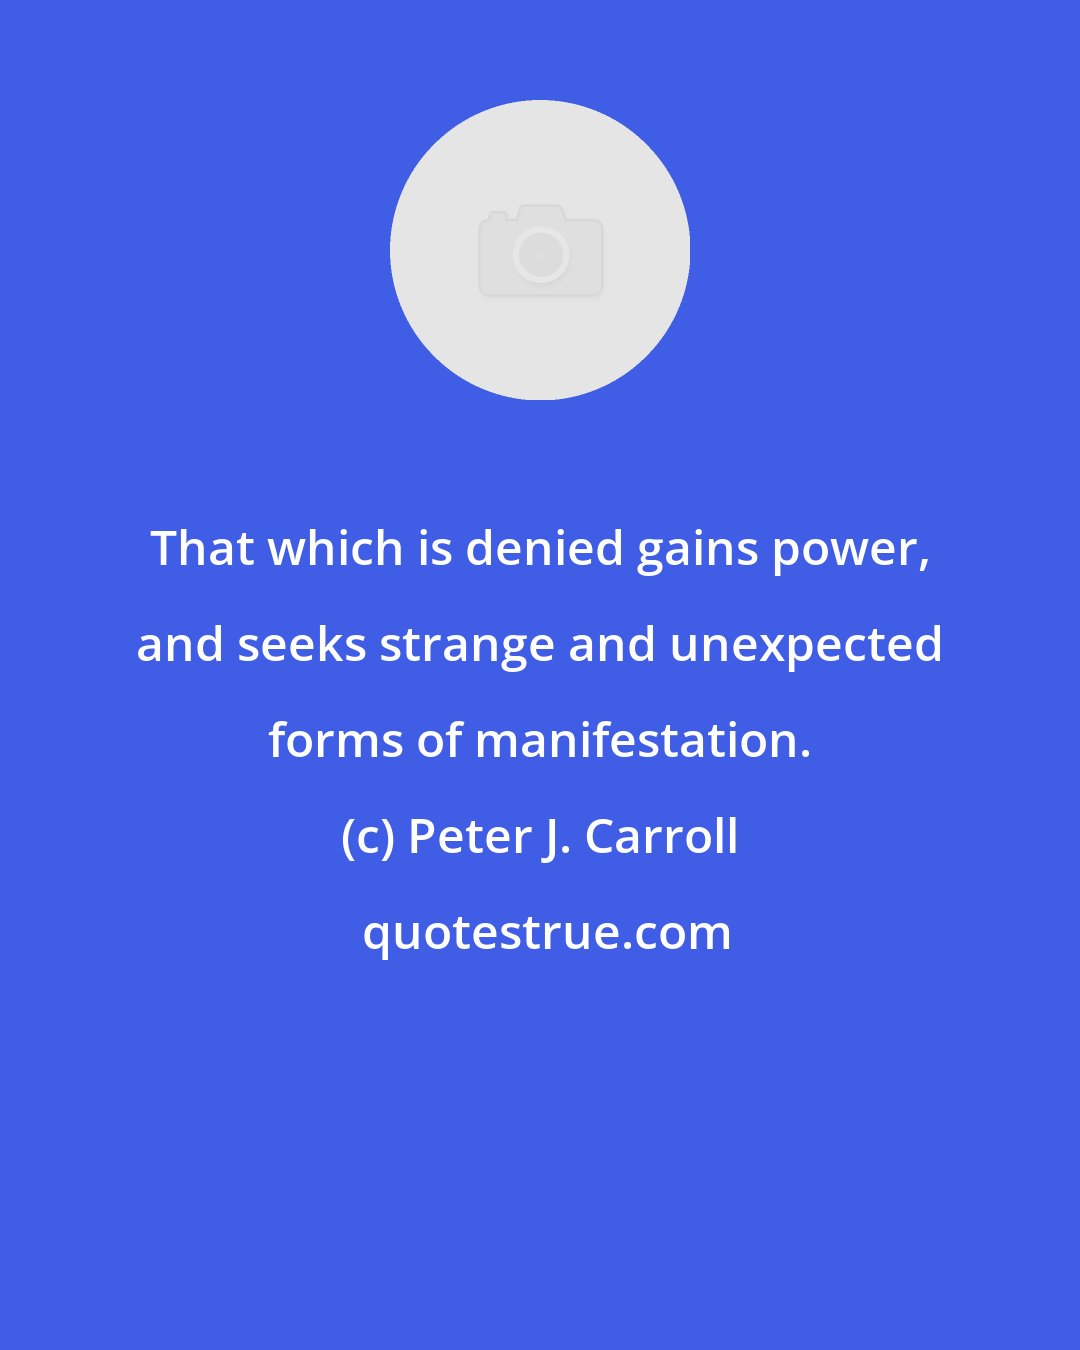 Peter J. Carroll: That which is denied gains power, and seeks strange and unexpected forms of manifestation.